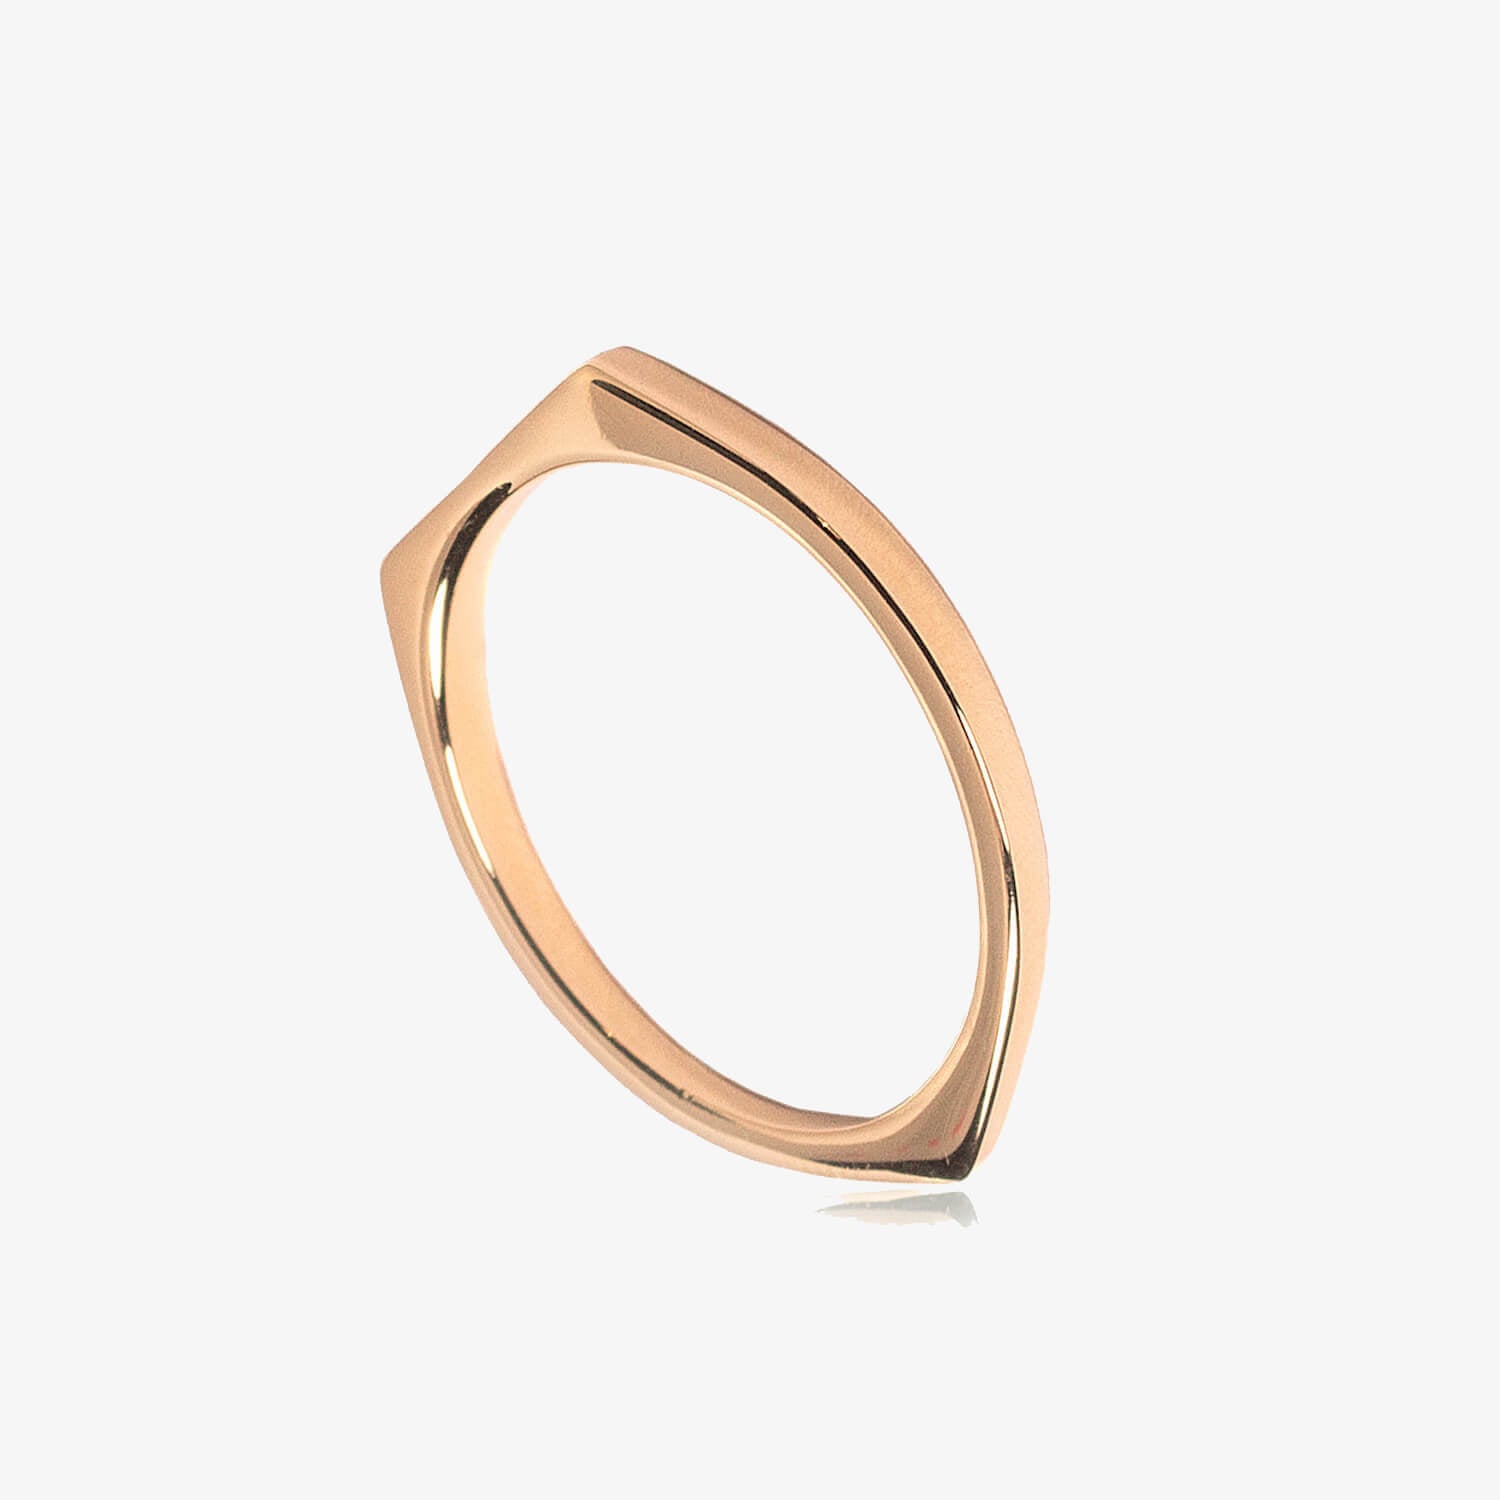 A thin signet ring with a point on the bottom edge in rose gold